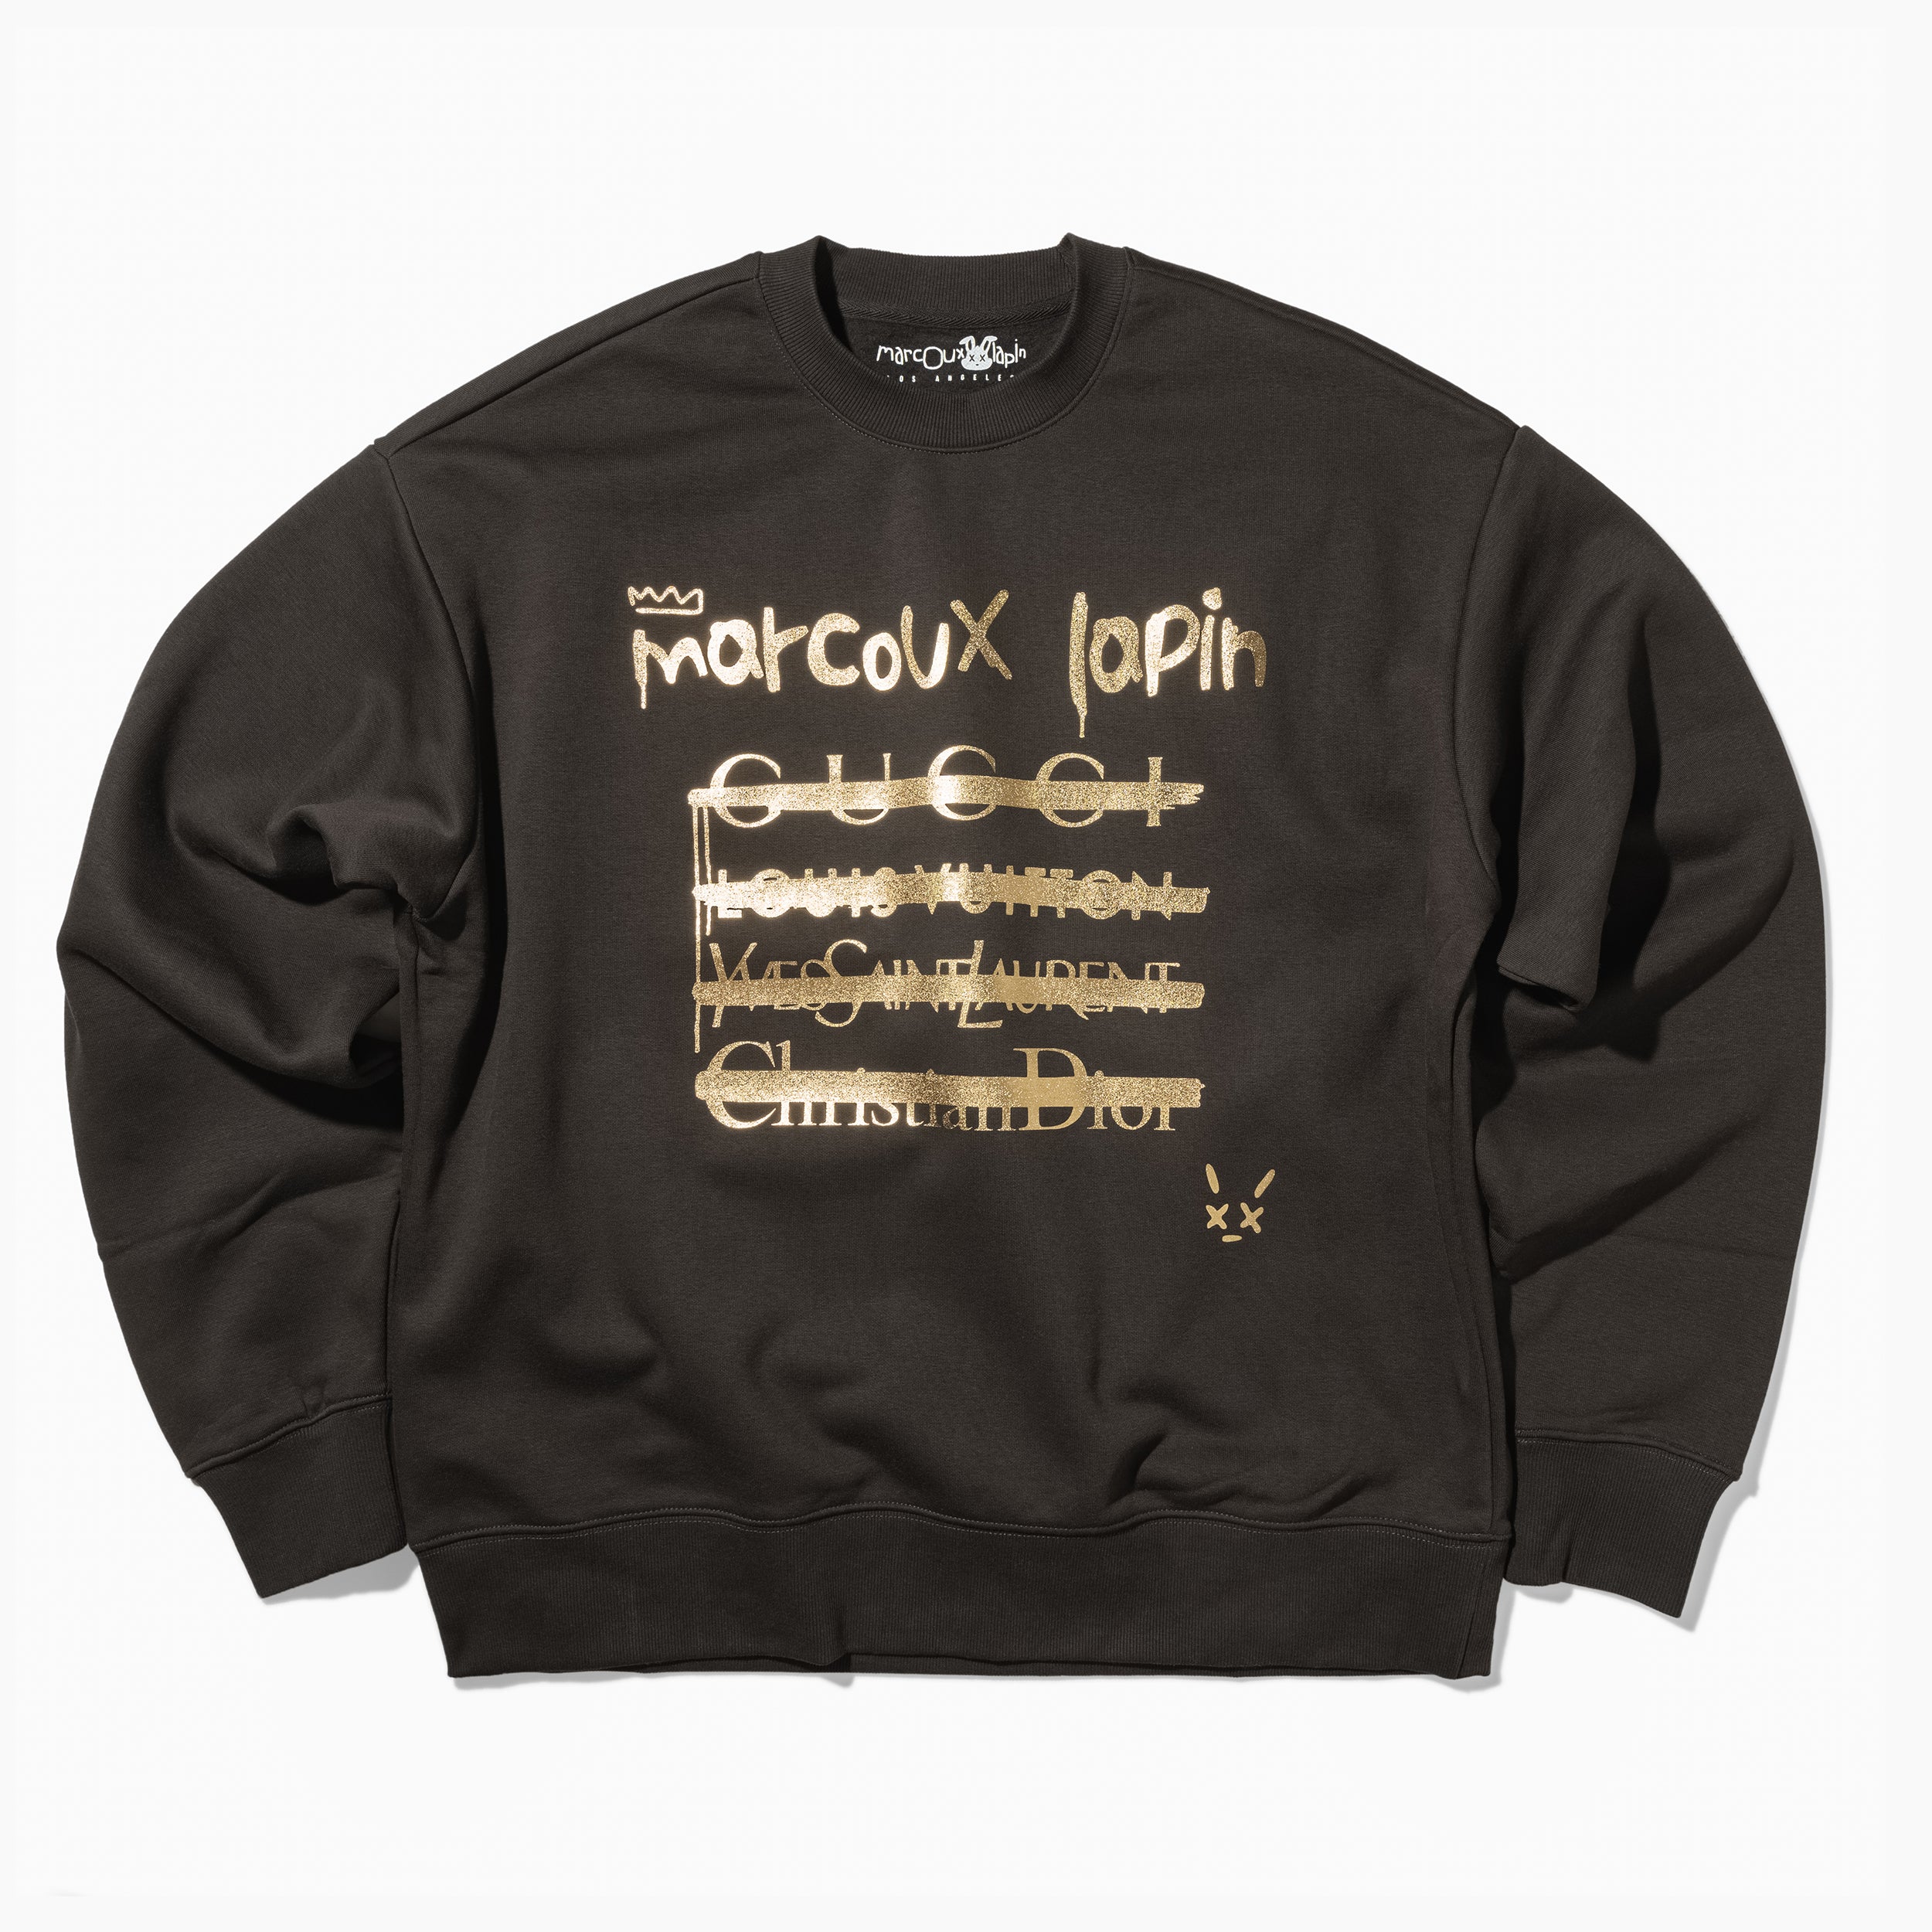 Crossing Out Names Sweatshirt (Gold Over Charcoal)